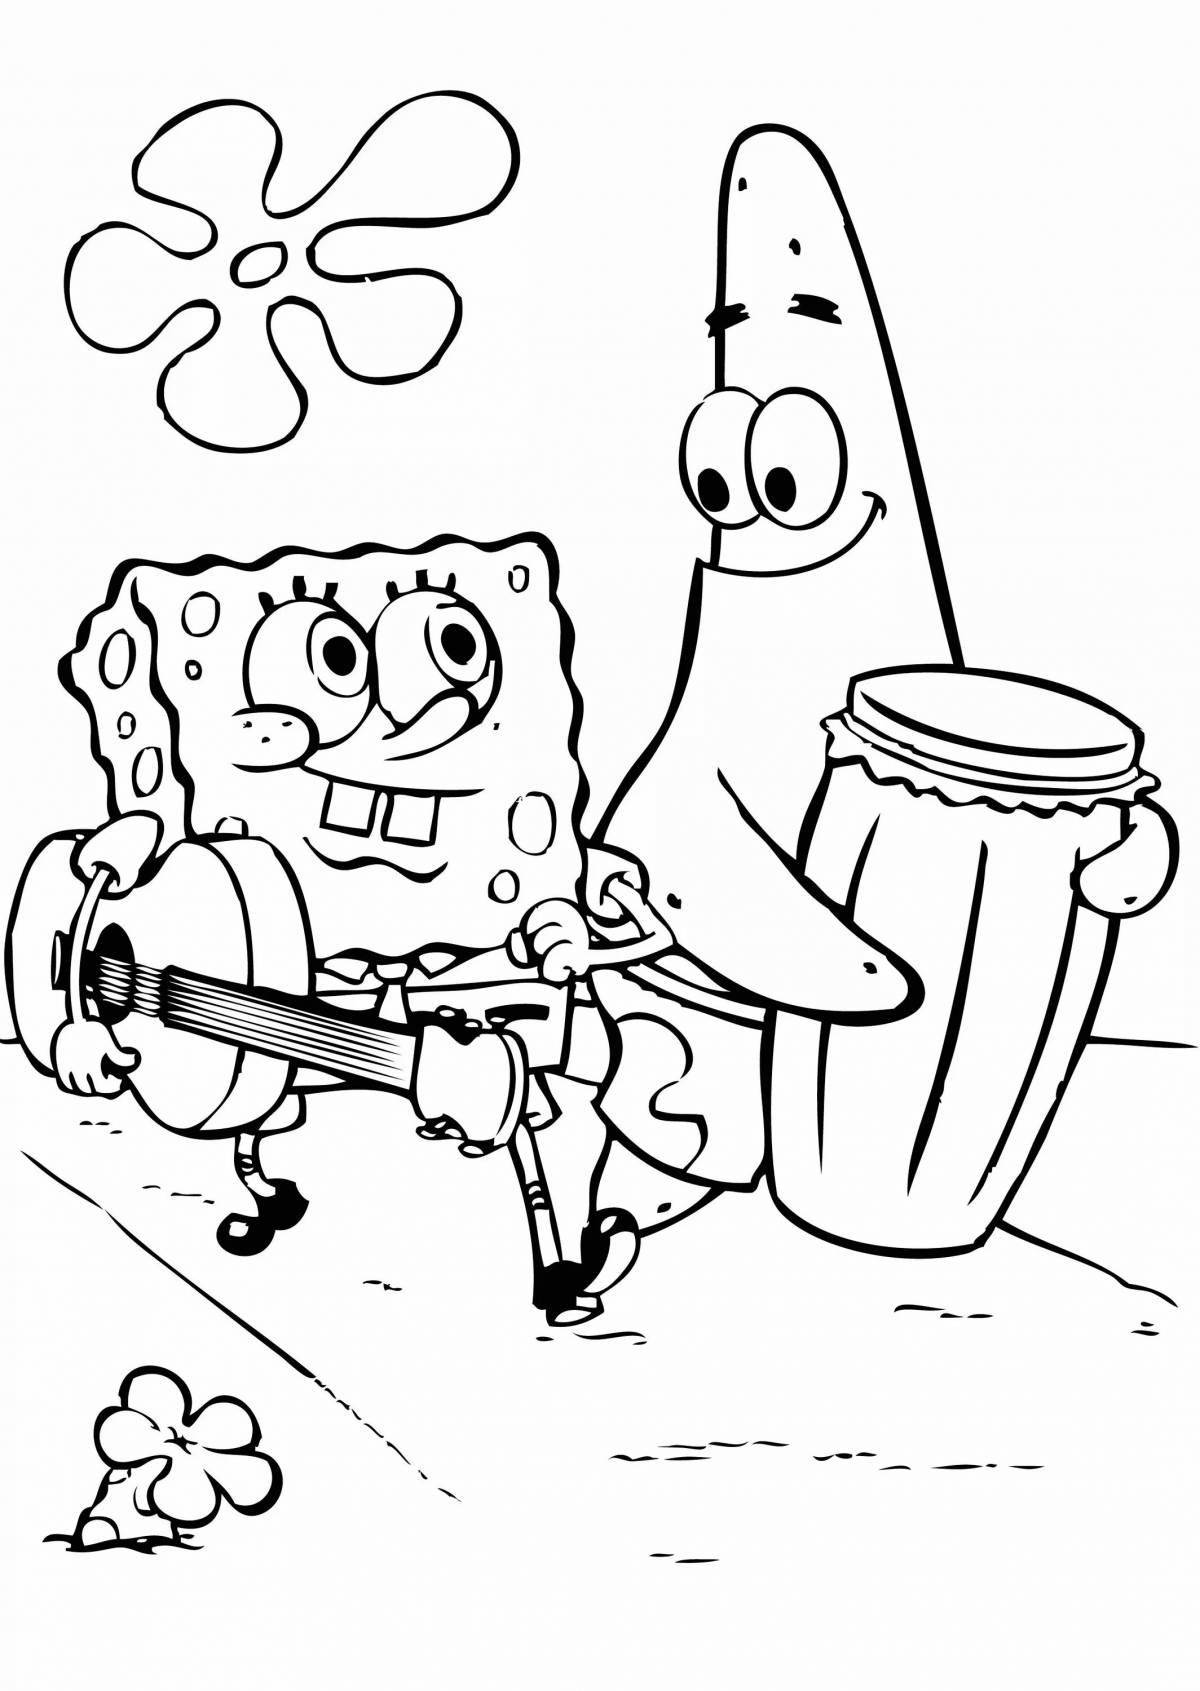 Color-frenzy coloring page губка боб для детей